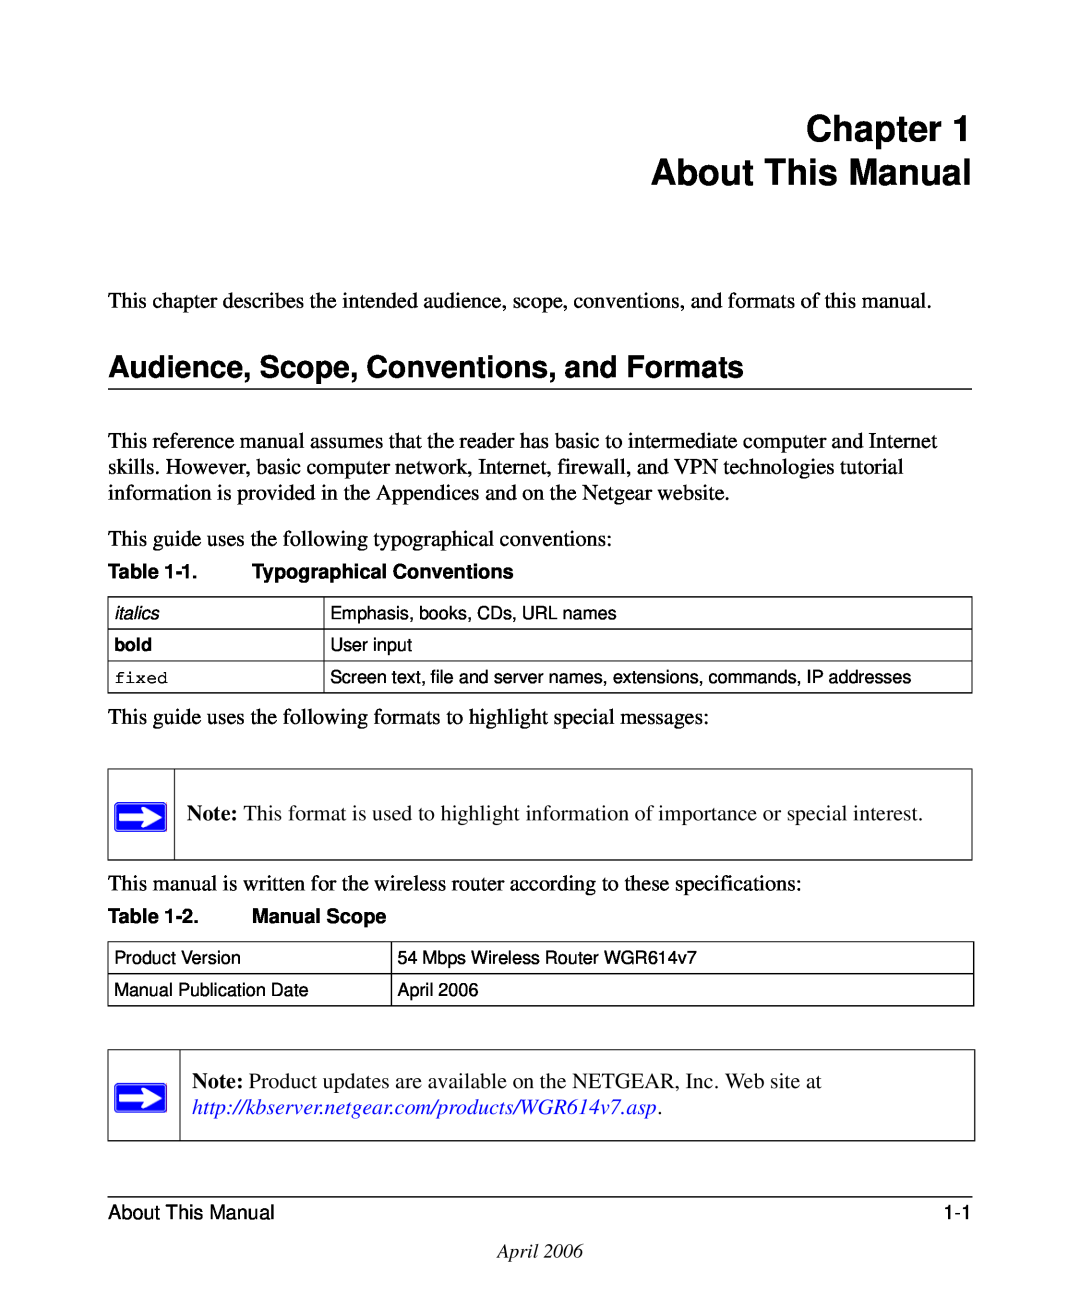 NETGEAR WGR614v7 manual Chapter About This Manual, Audience, Scope, Conventions, and Formats 